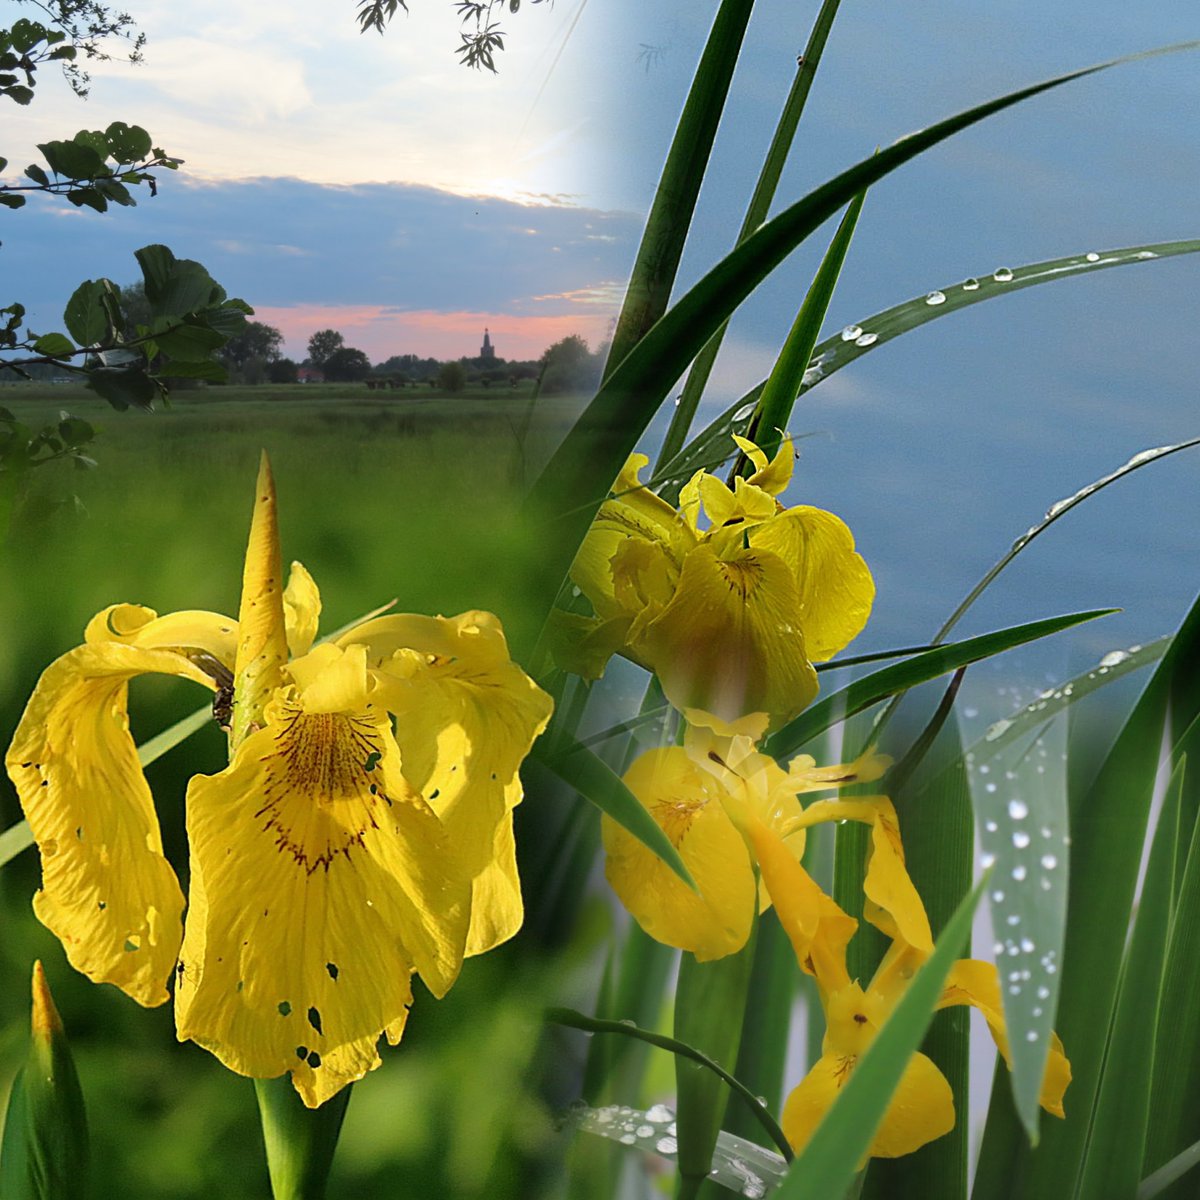 May 15 , have a good day .....💛💚
#NatureMagic
#irises
#collageart